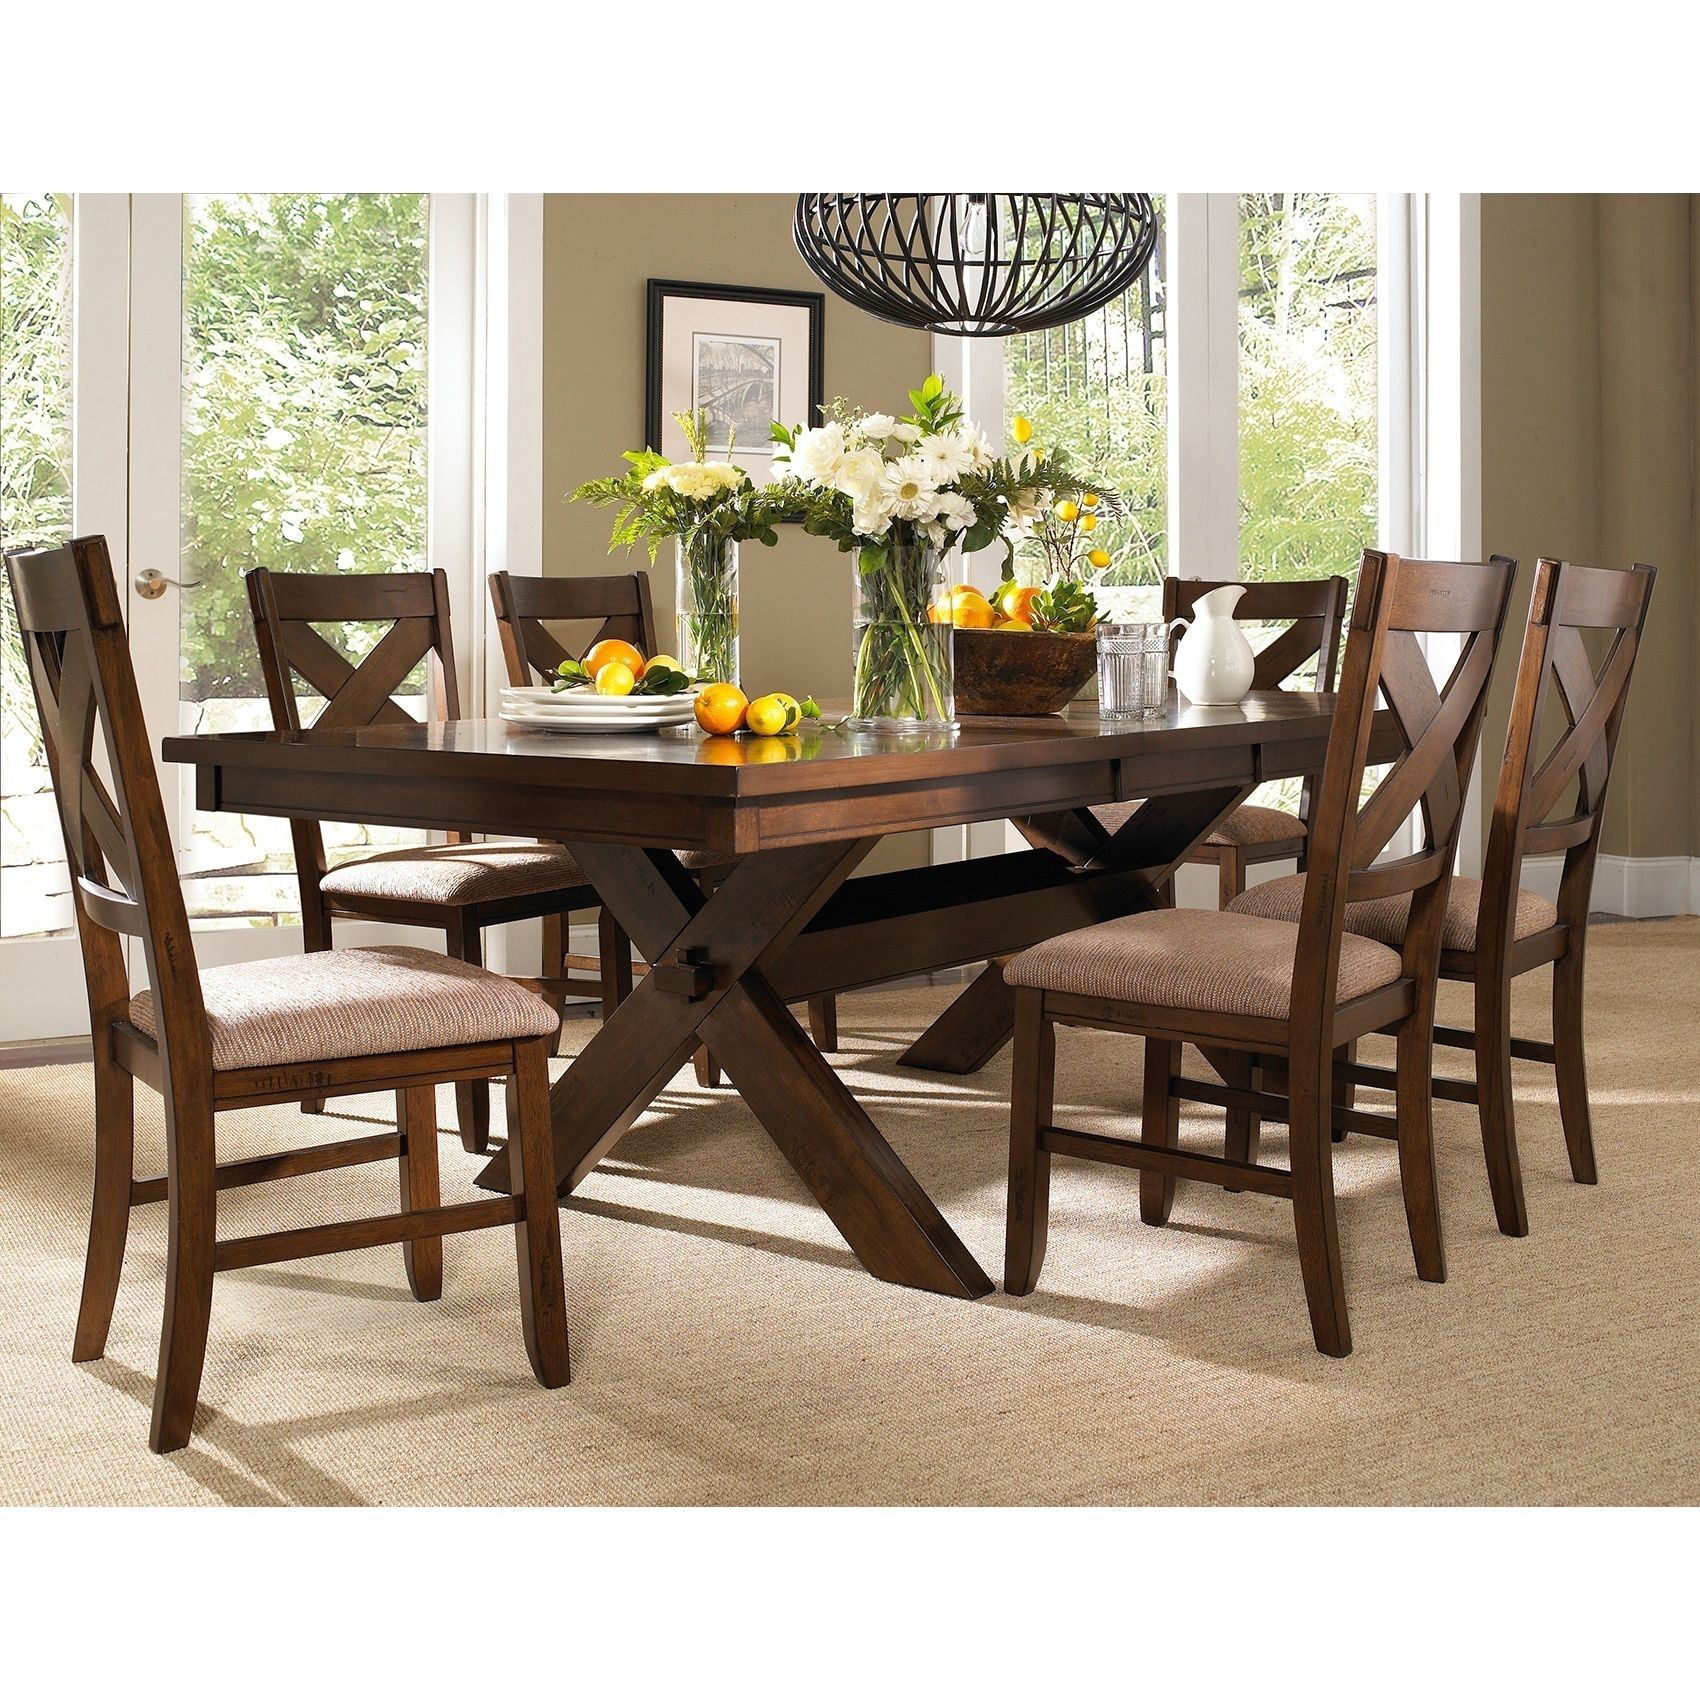 20 Collection of Craftsman 7 Piece Rectangular Extension Dining Sets